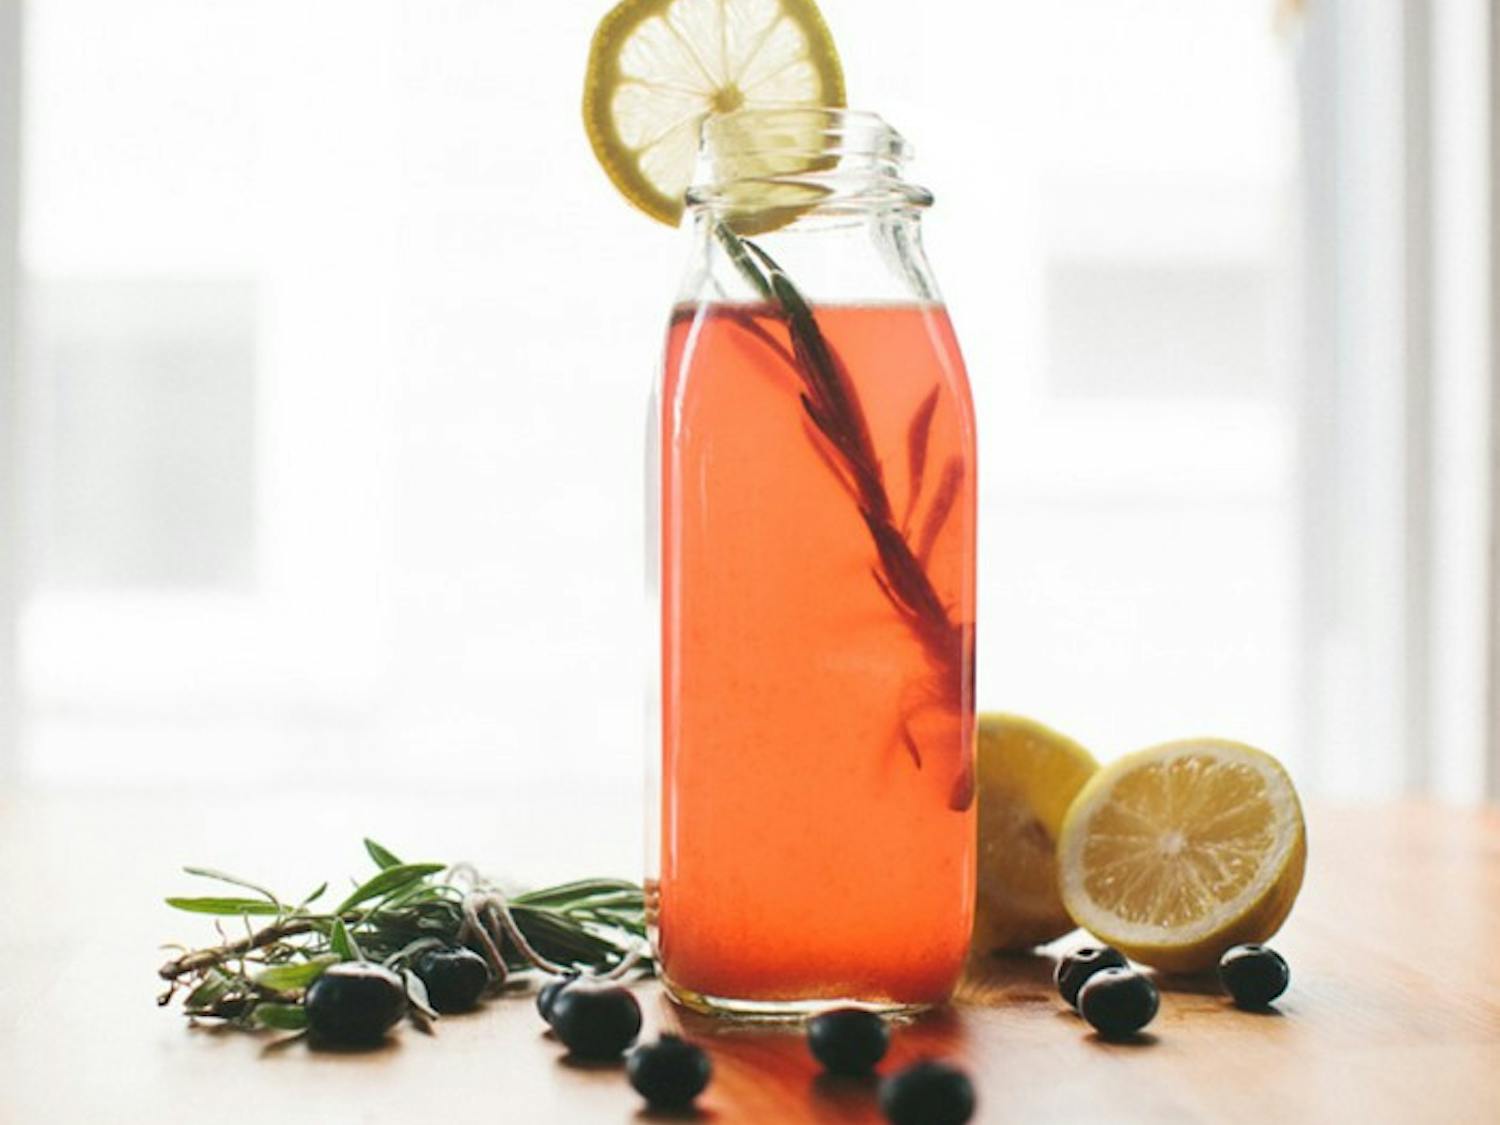 After a long, hot day on campus, try this ice-cold blueberry-lavender lemonade recipe. For the freshest ingredients, check out the Union Street Farmers Market on Wednesdays in downtown Gainesville.